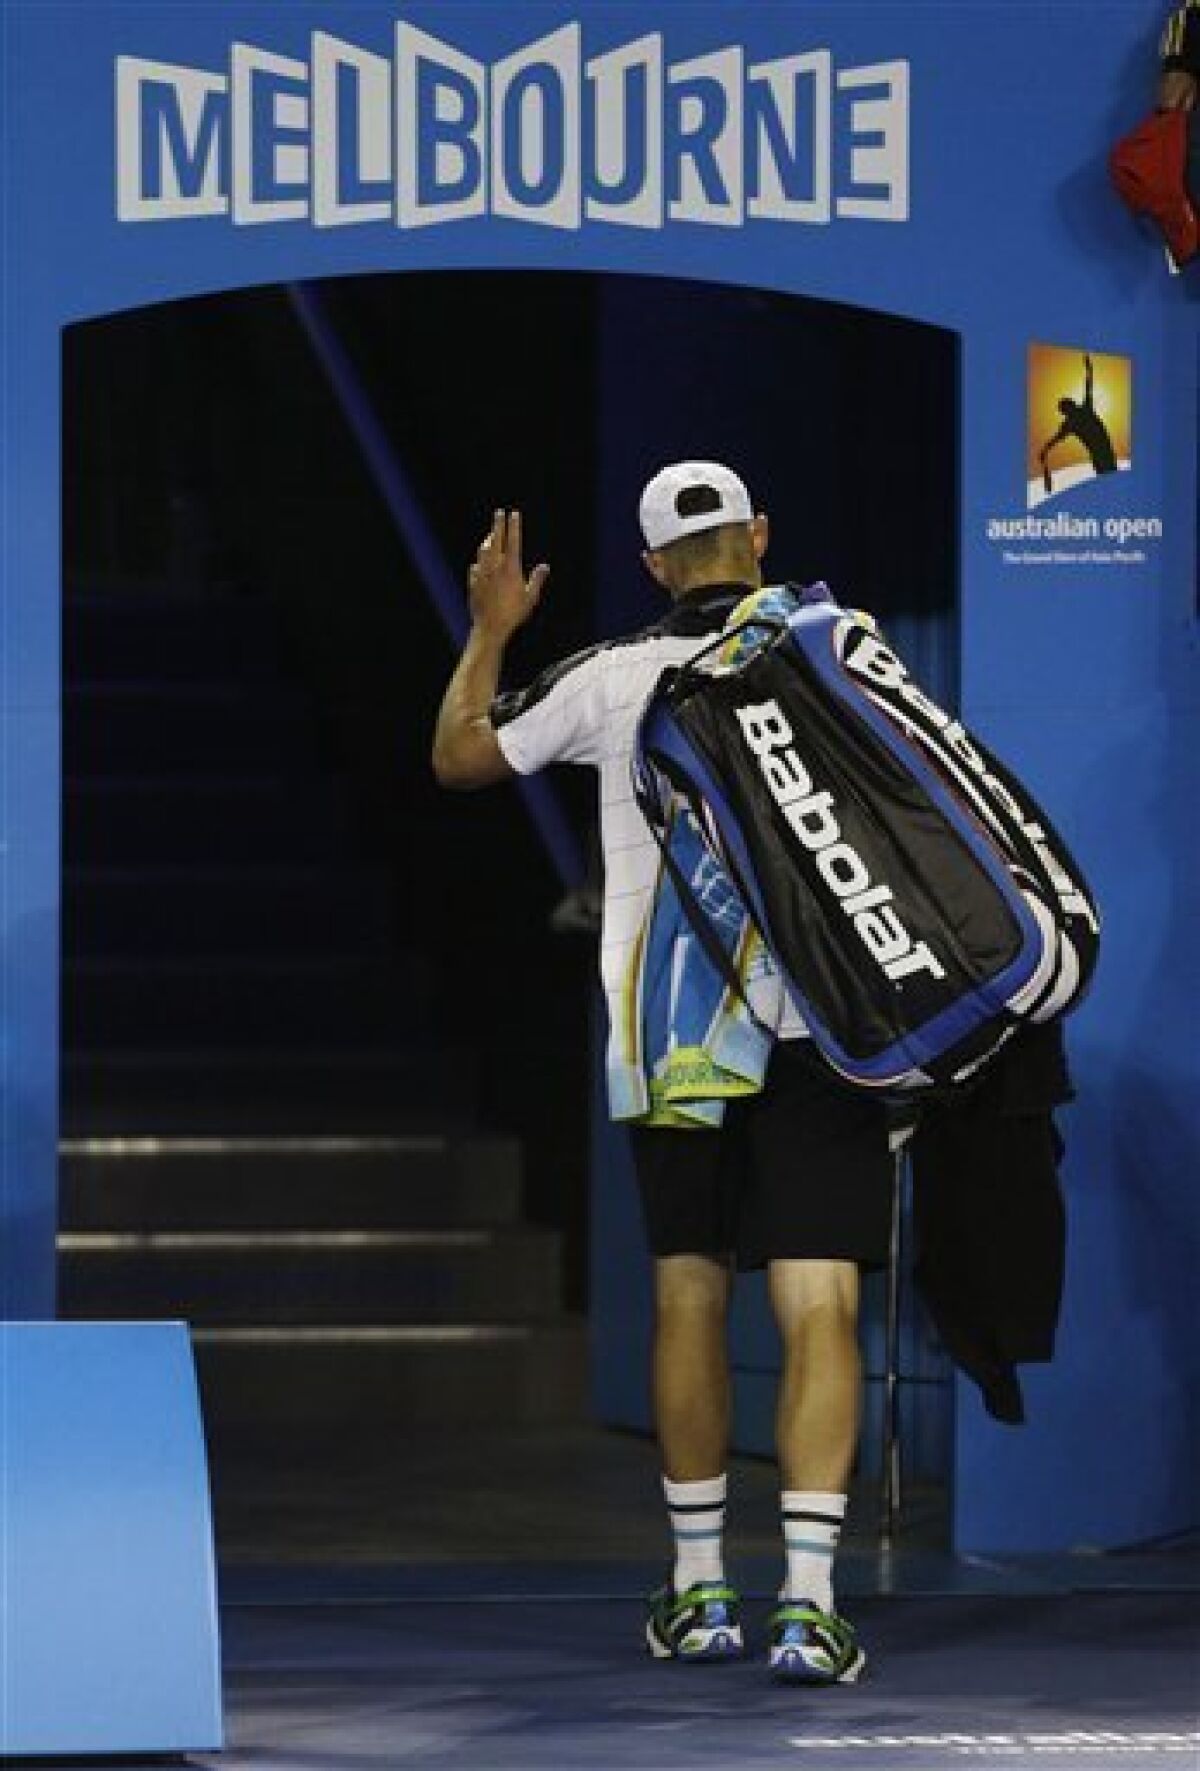 Andy Roddick of the US waves as he leaves Rod Laver Arena after retiring injured from his second round match against Australia's Lleyton Hewitt at the Australian Open tennis championship, in Melbourne, Australia, Thursday, Jan. 19, 2012. (AP Photo/Rick Rycroft)